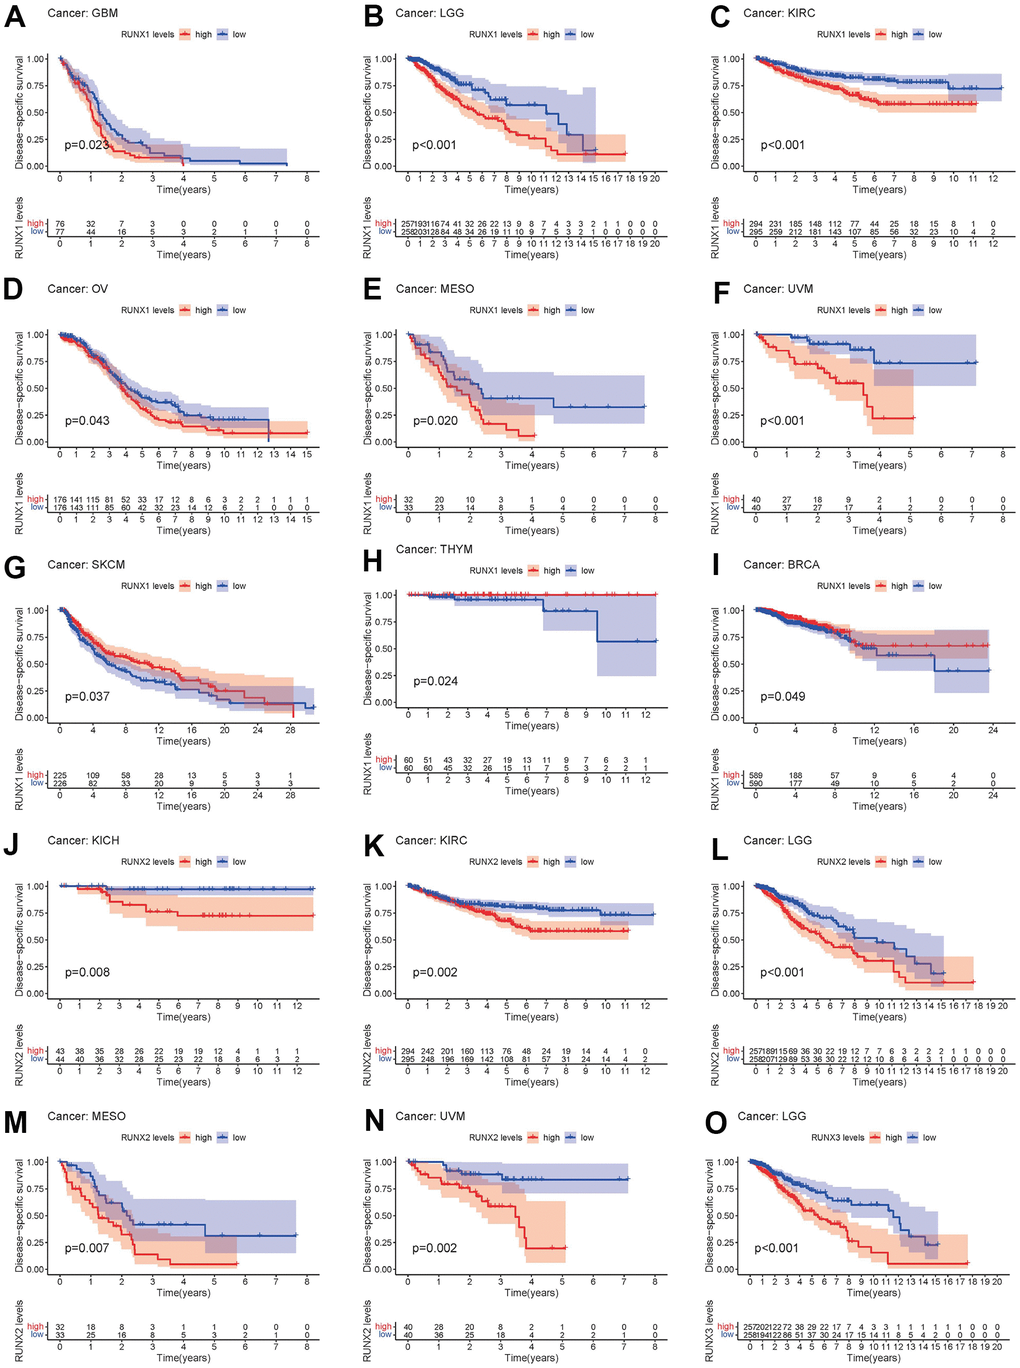 Kaplan–Meier survival curves comparing pan-cancer high and low expression of RUNX gene family genes. DSS survival curves for RUNX1 in different cancers: (A) GBM, (B) LGG, (C) KIRC, (D) OV, (E) MESO, (F) UVM, (G) SKCM, (H) THYM, (I) BRCA. DSS survival curves for RUNX2 in different cancers: (J) KICH, (K) KIRC, (L) LGG, (M) MESO, (N) UVM. DSS survival curves for RUNX3 in different cancers: (O) LGG.